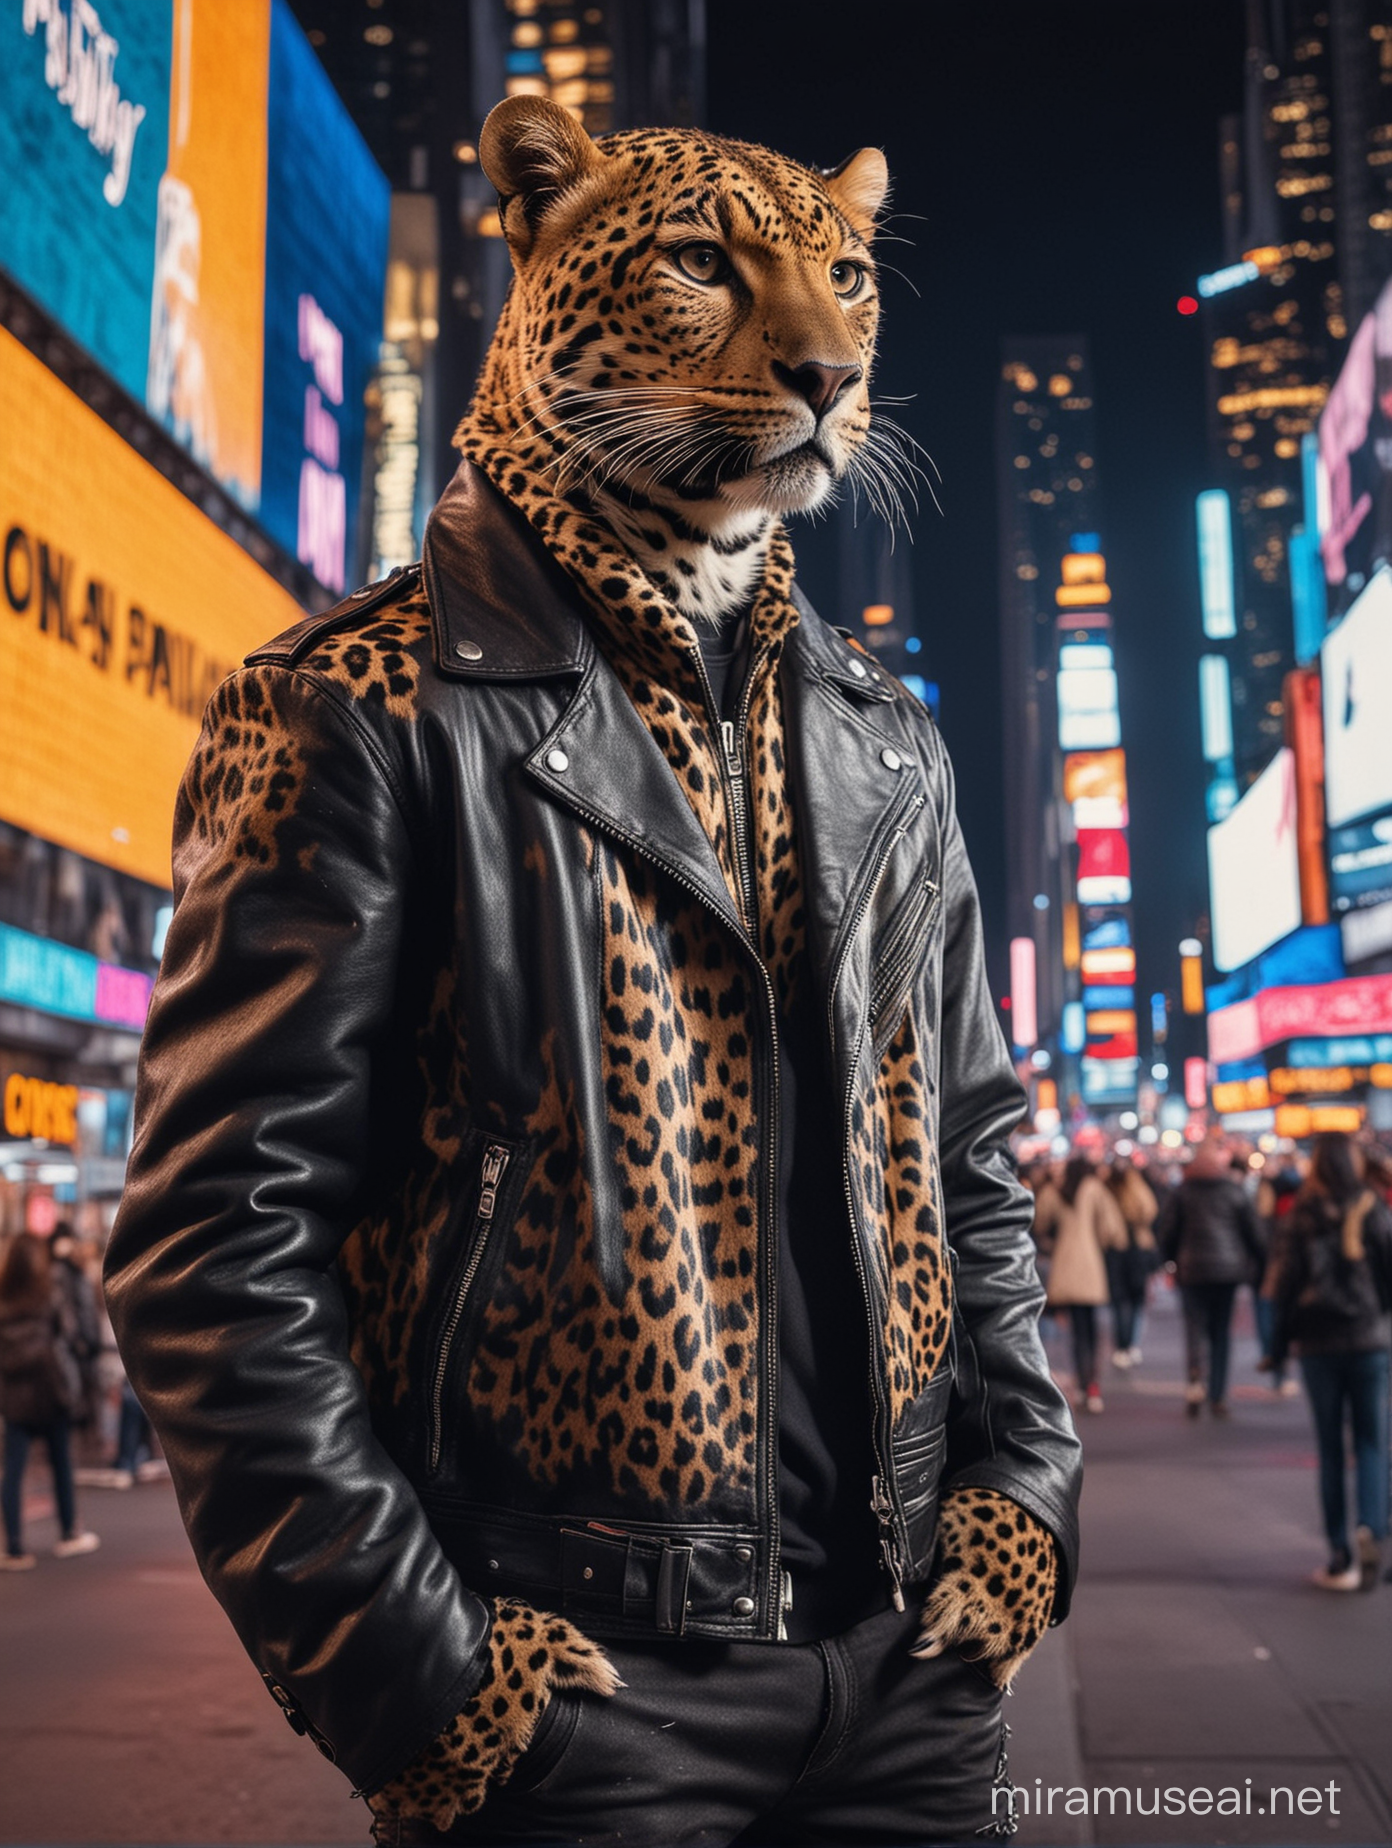 MALE LEOPARD ANIMAL WITH LEATHER JACKET, rough appearance, IN NEW YORK CITY AT NIGHT, BACKGROUND OF TIMES SQUARE, NEON STYLE